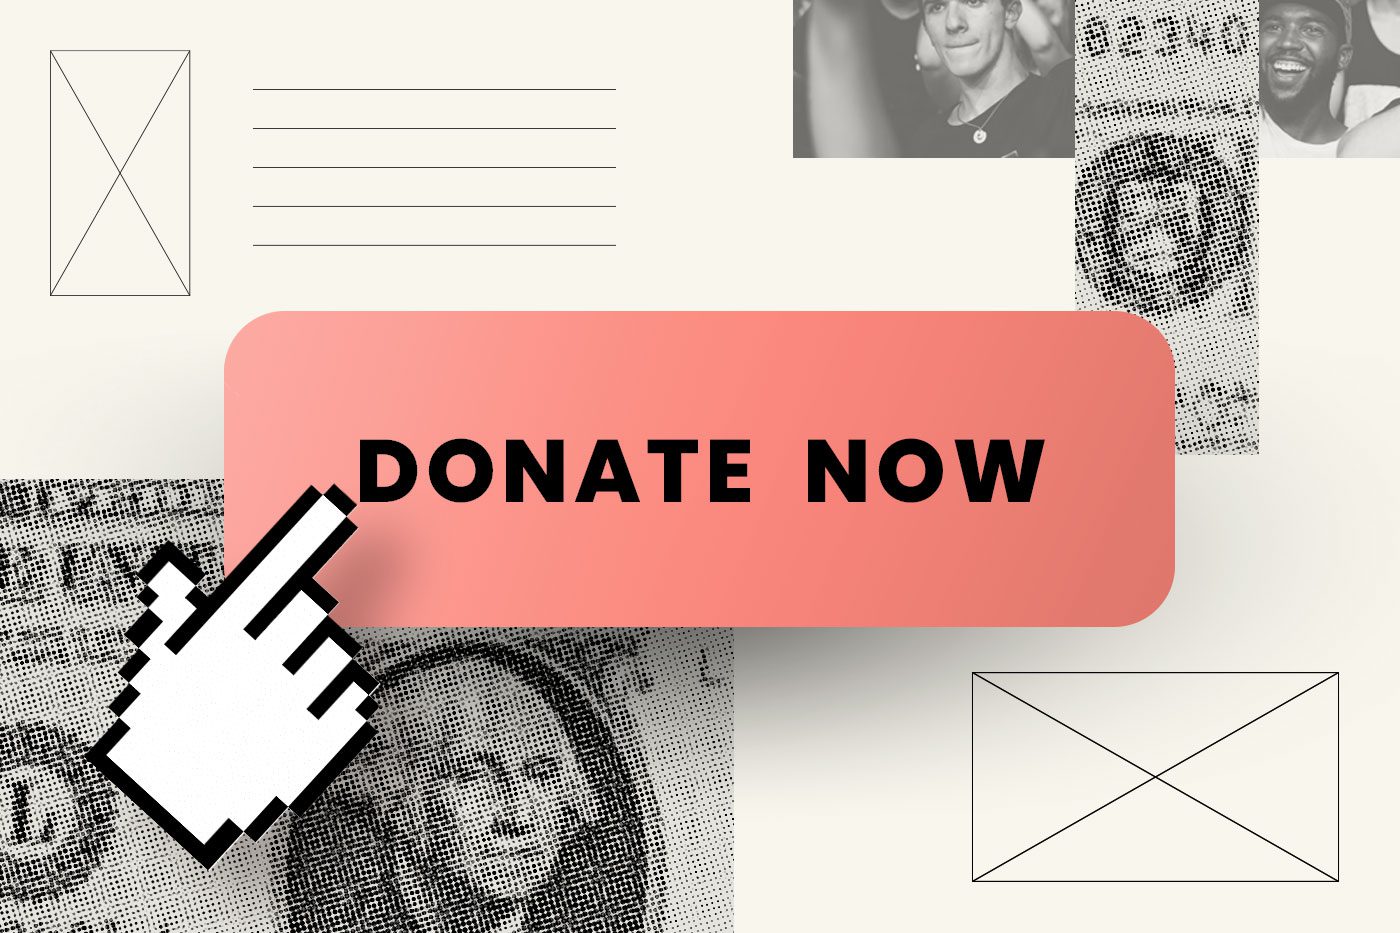 Donation form for nonprofits with Donate Now button